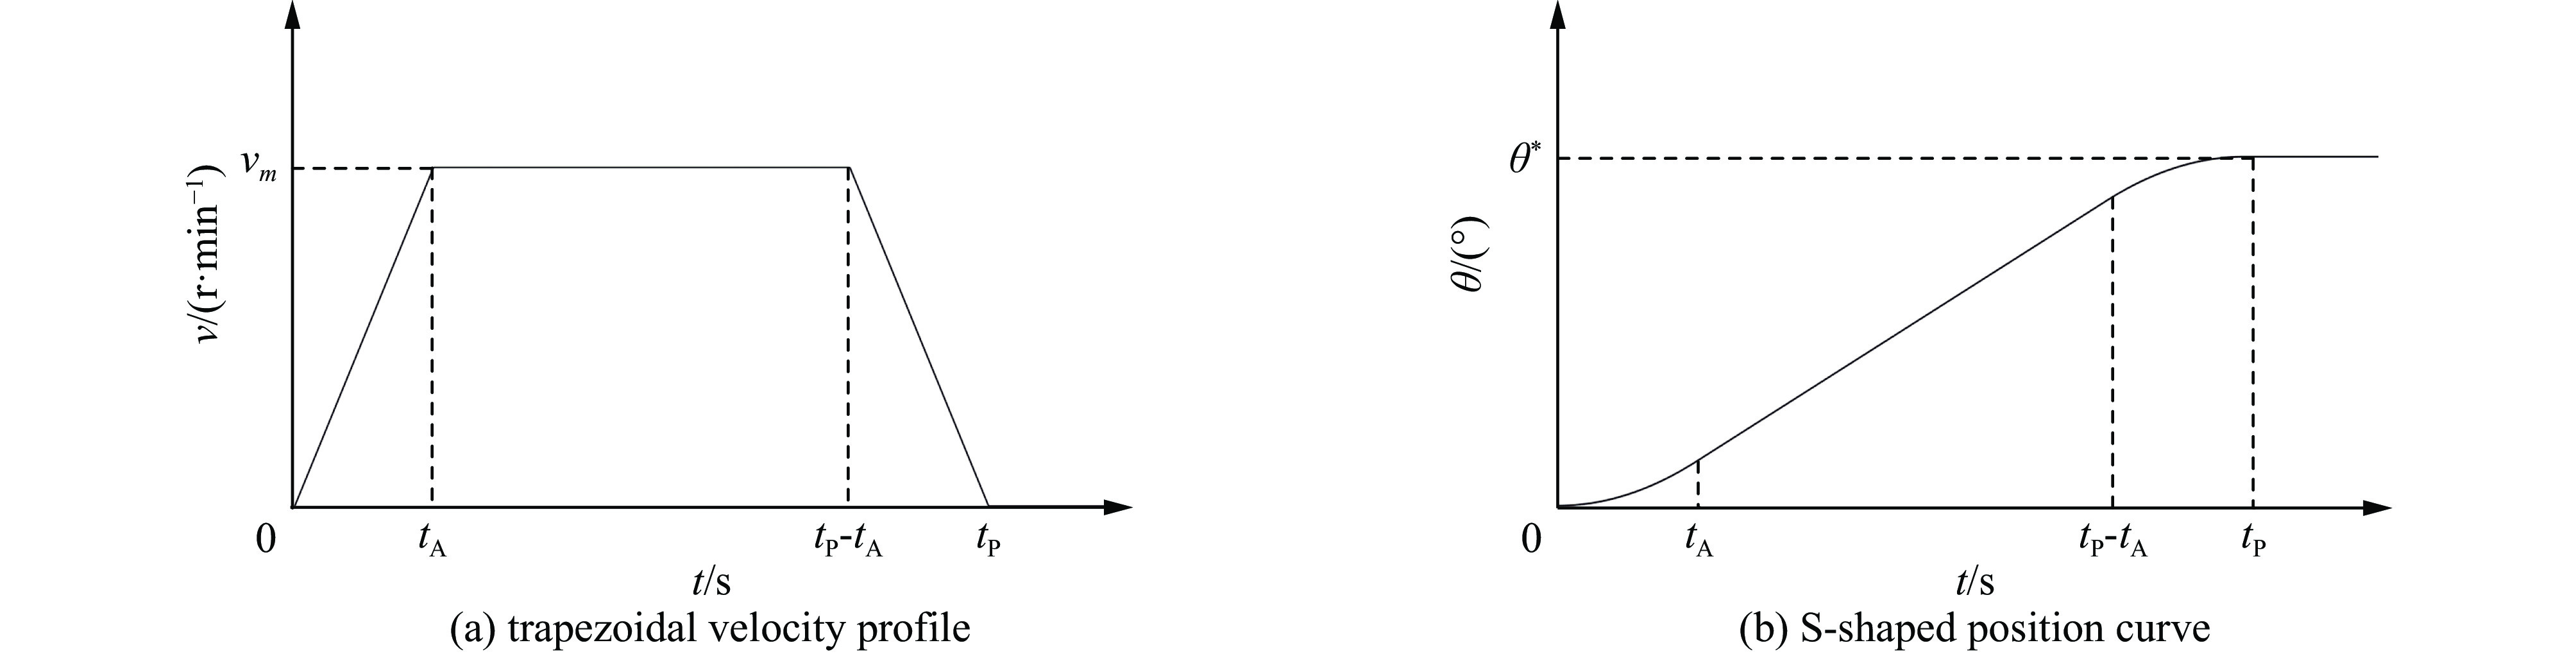 Trapezoidal velocity profile and S-shaped position curve